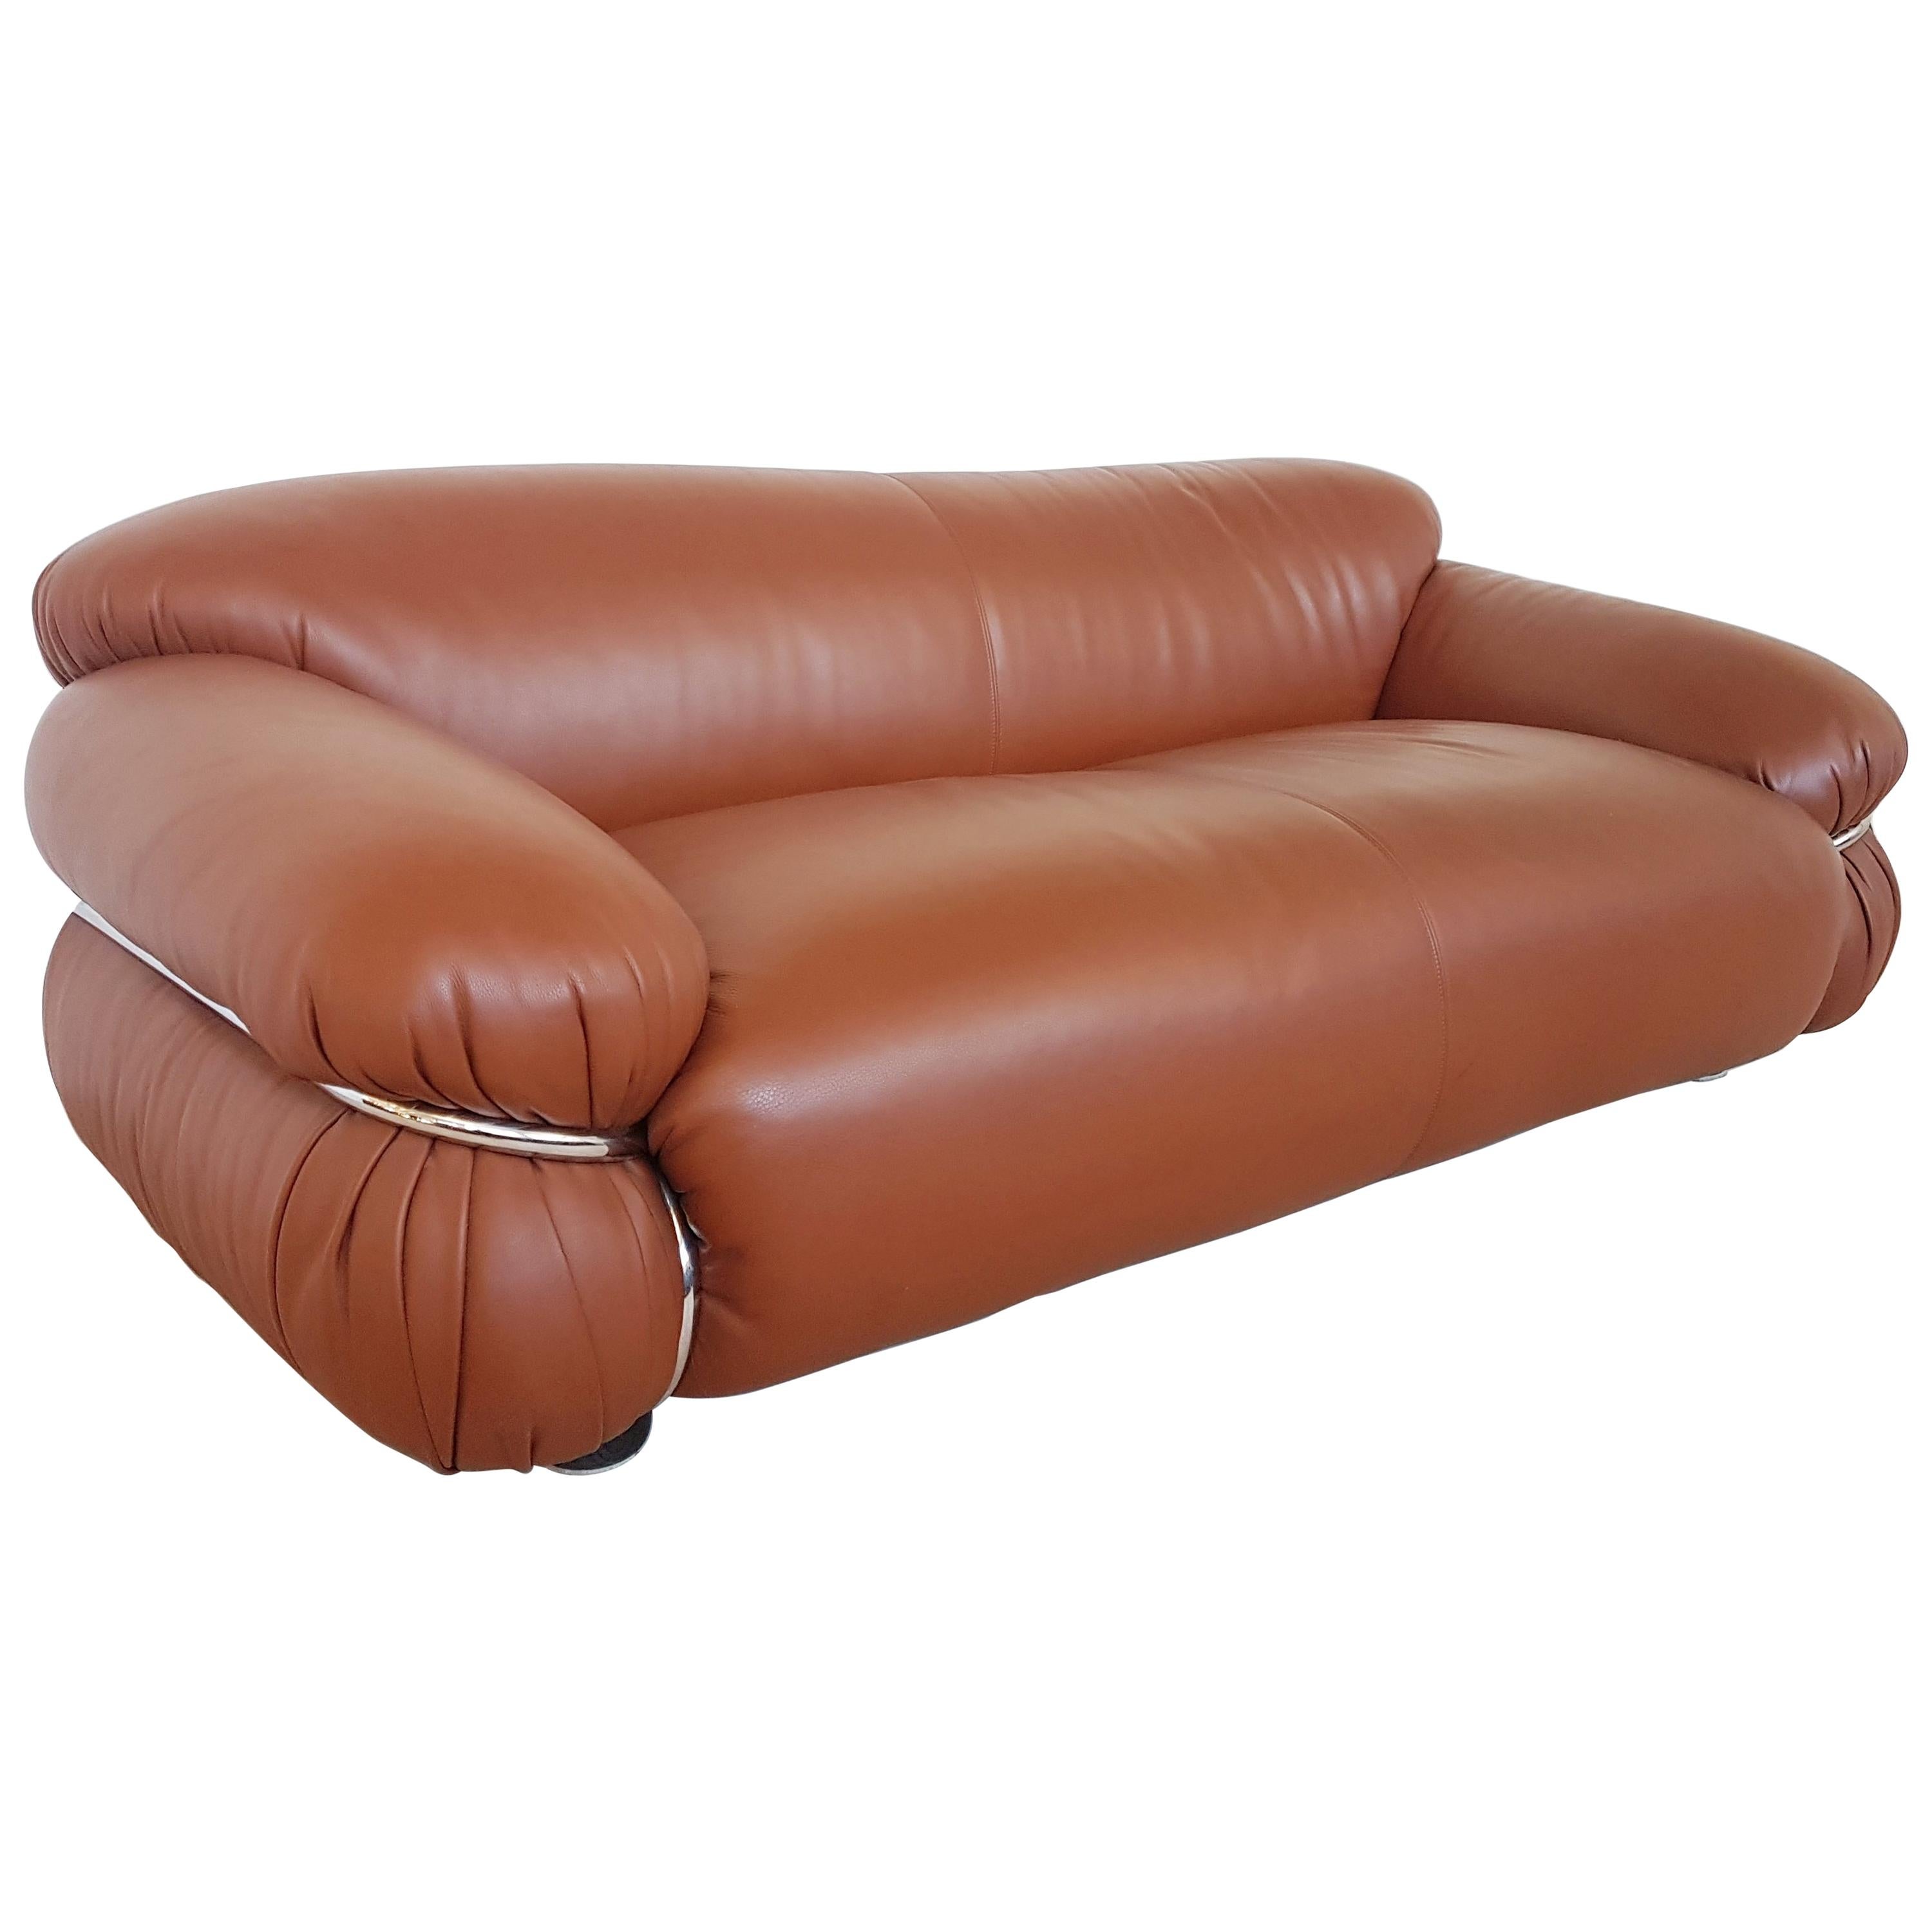 Cassina 'Sesann' Two-Seat in Cognac Leather and Chrome